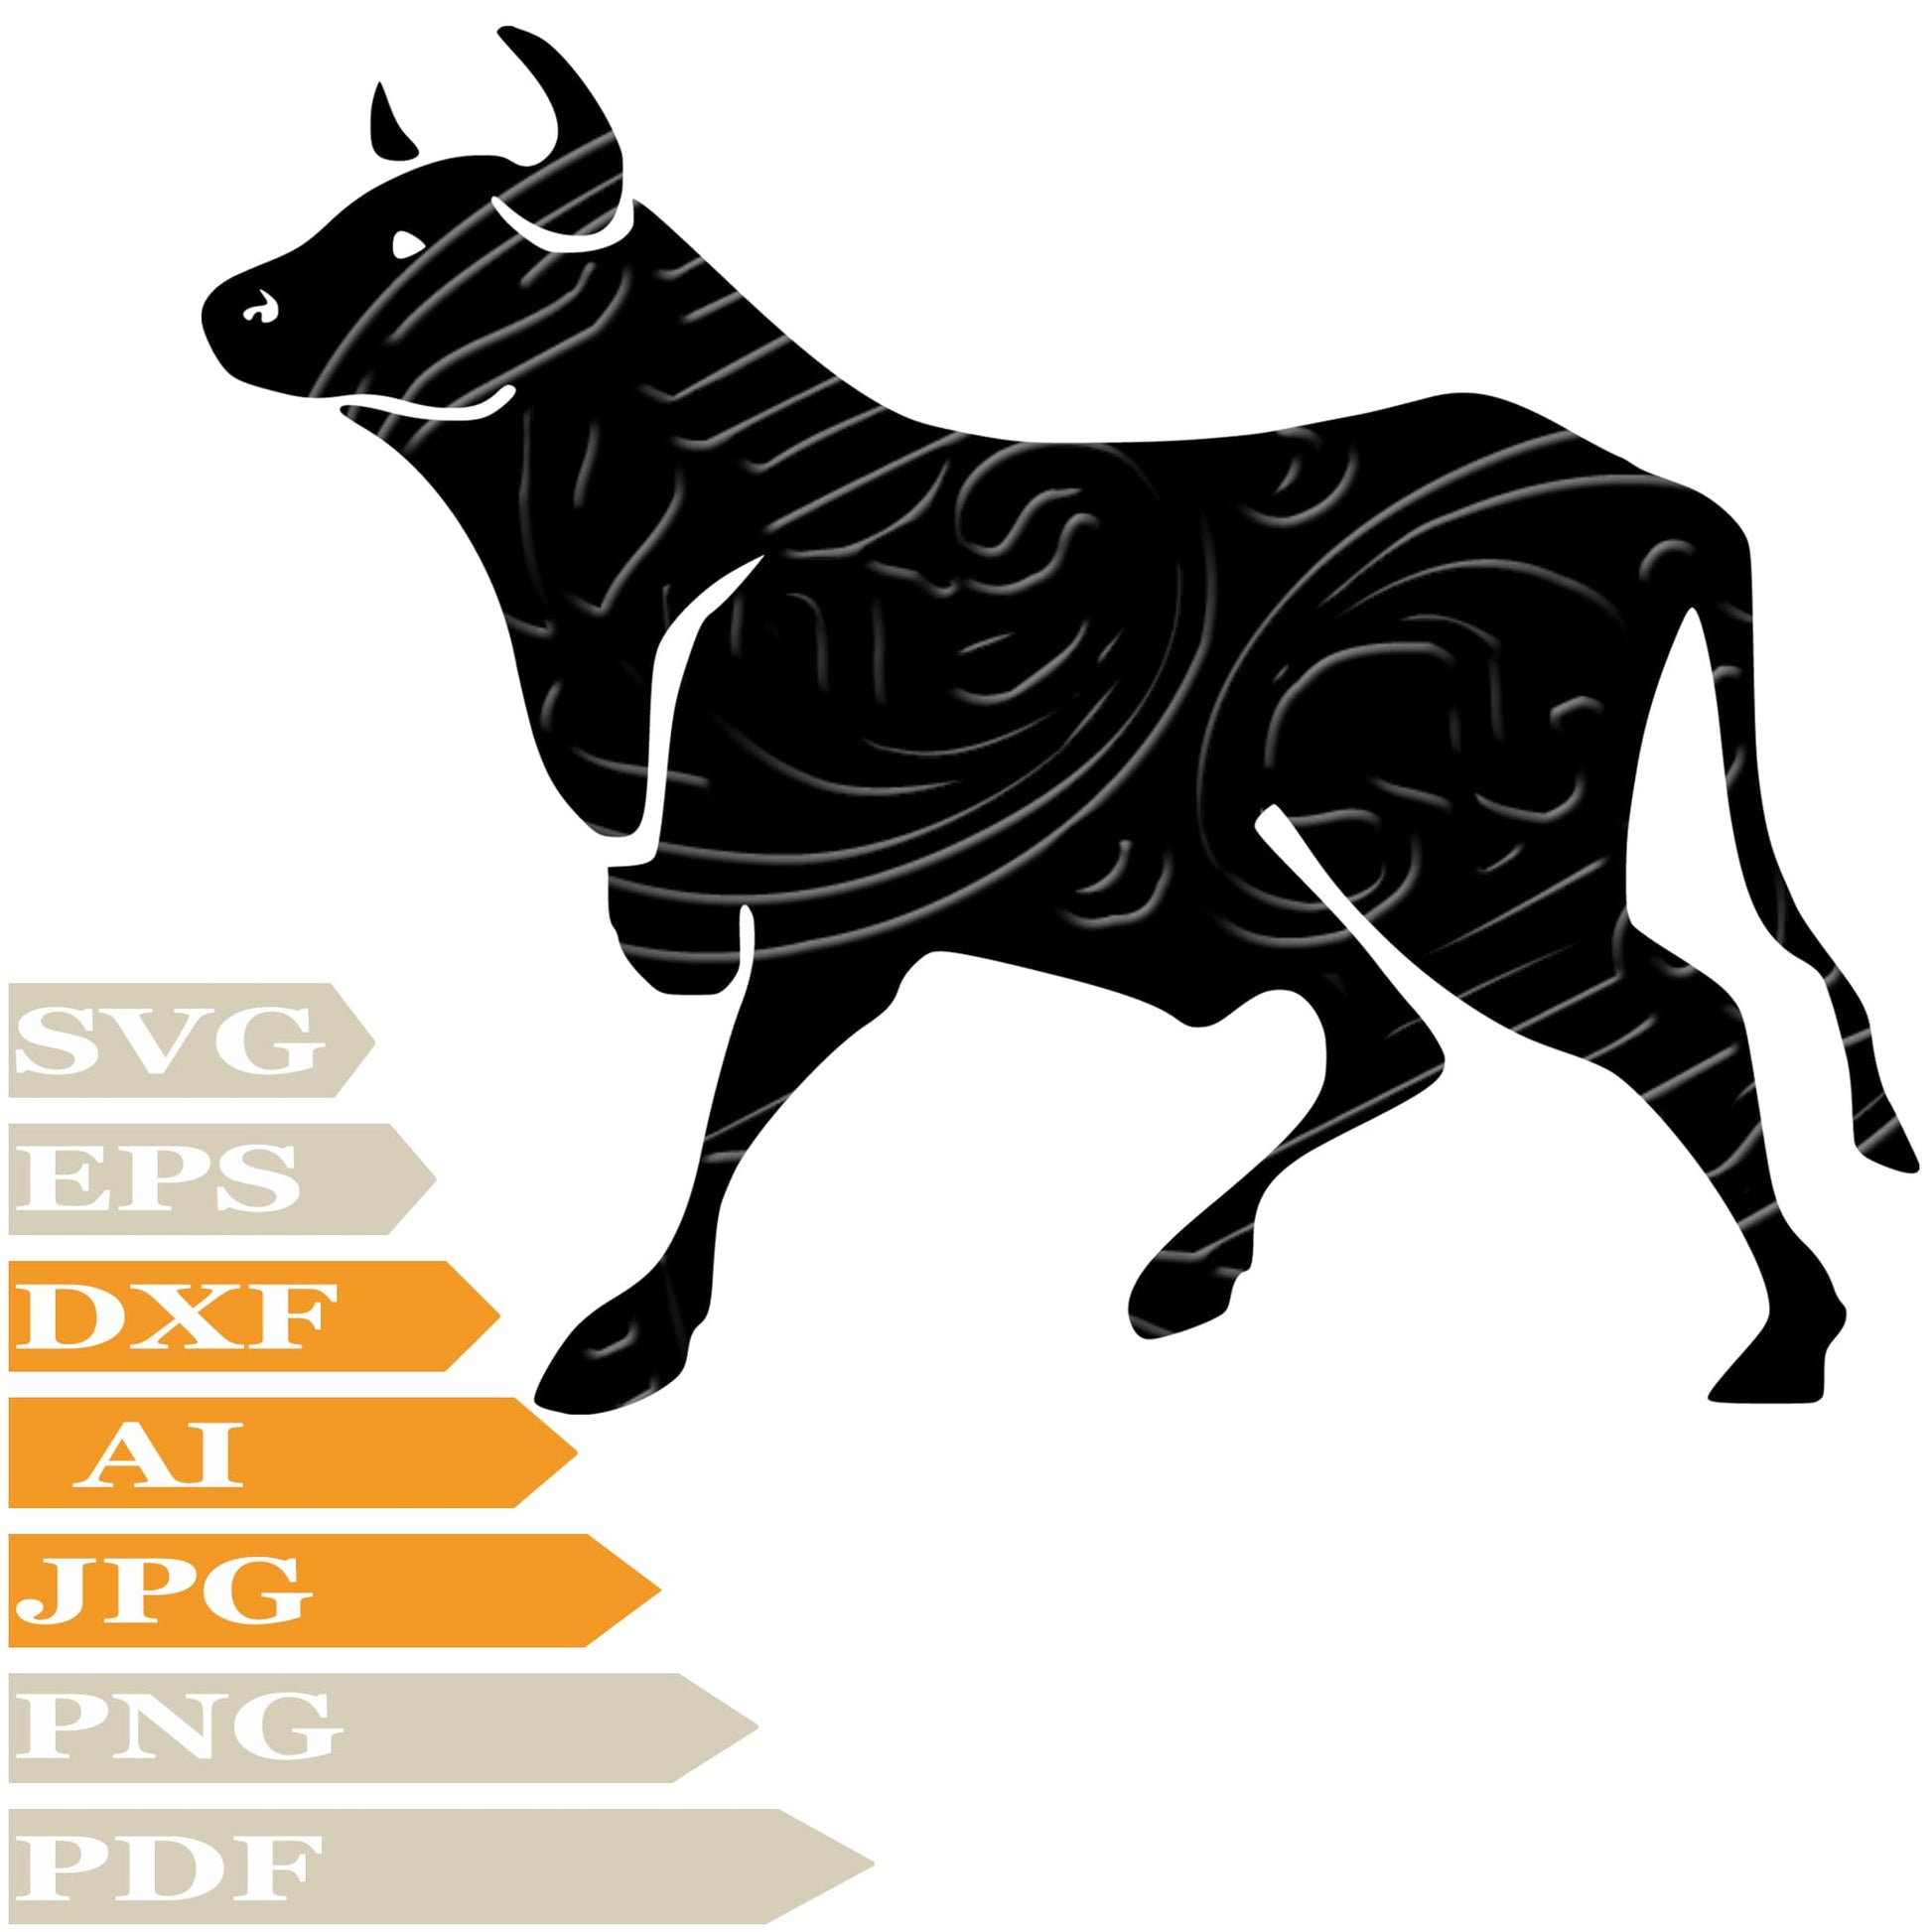 Bull Svg File, Image Cut, Png, For Tattoo, Silhouette, Digital Vector Download, Cut File, Clipart, For Cricut